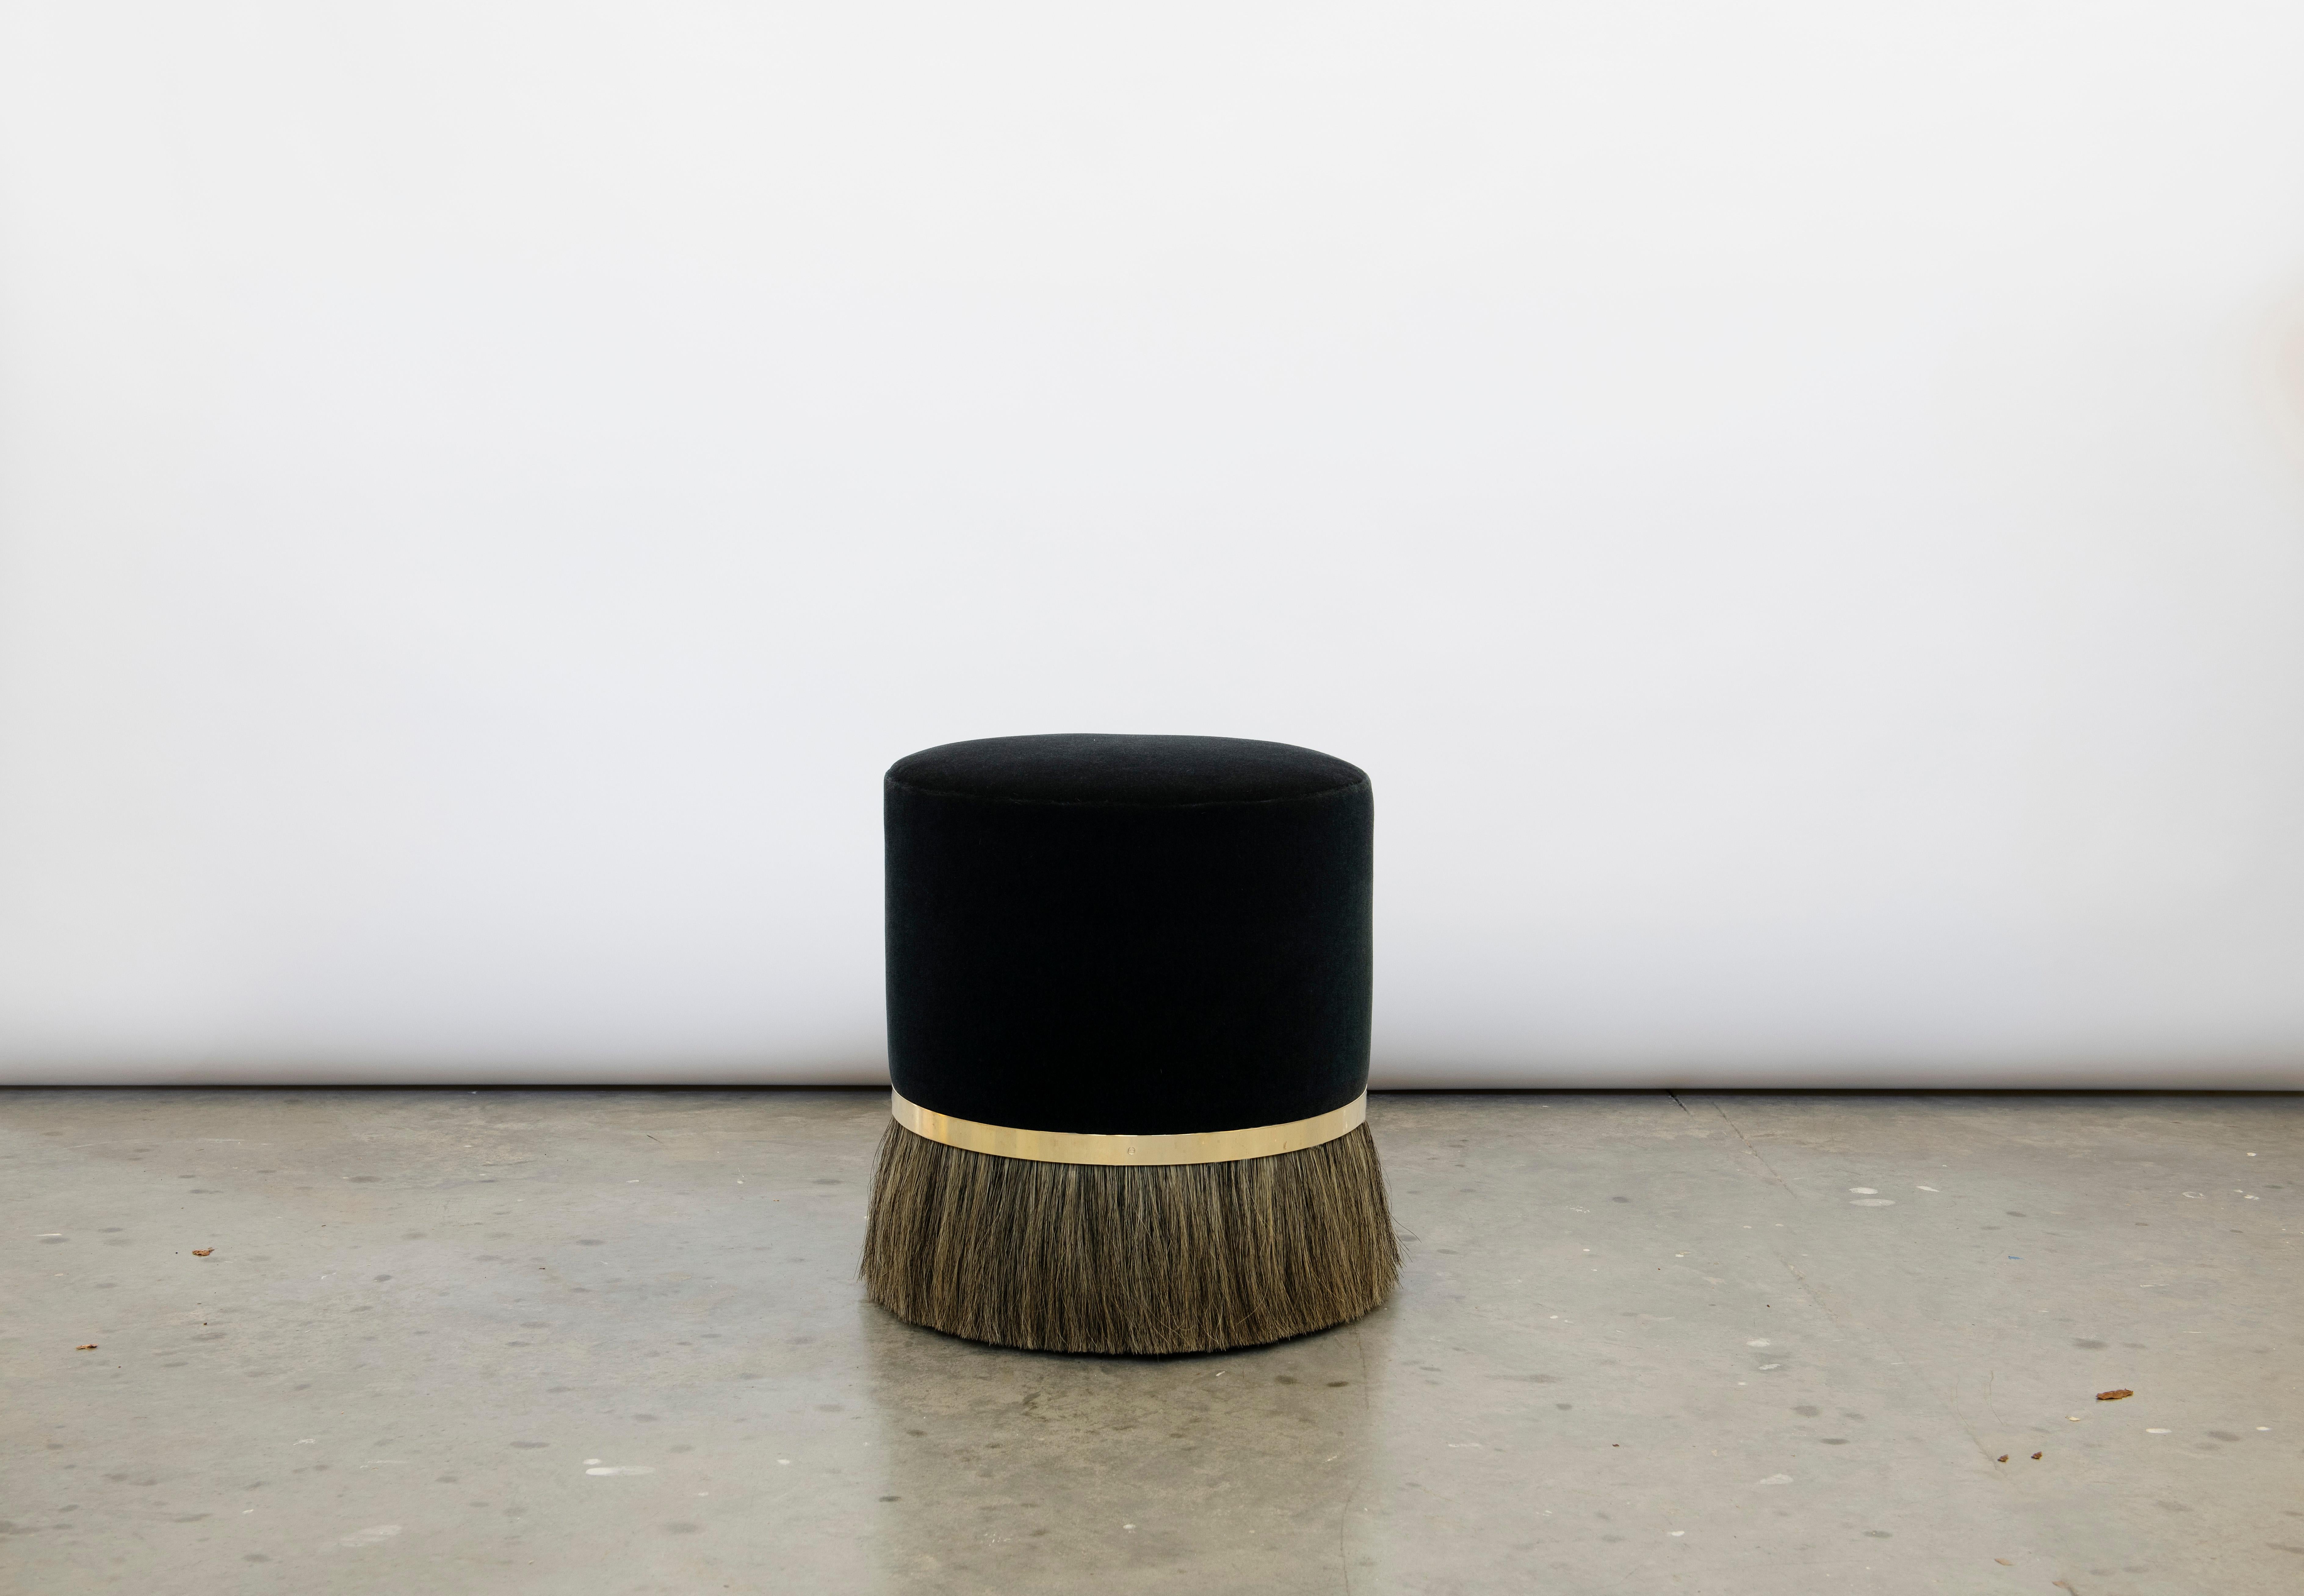 Refined yet wild, Thing 3's unique personality is accentuated with a distinctive combination of contrasting materials. This Thing 3 stool is in stock and available now as pictured, upholstered with black mohair, featuring medium silver horse hair